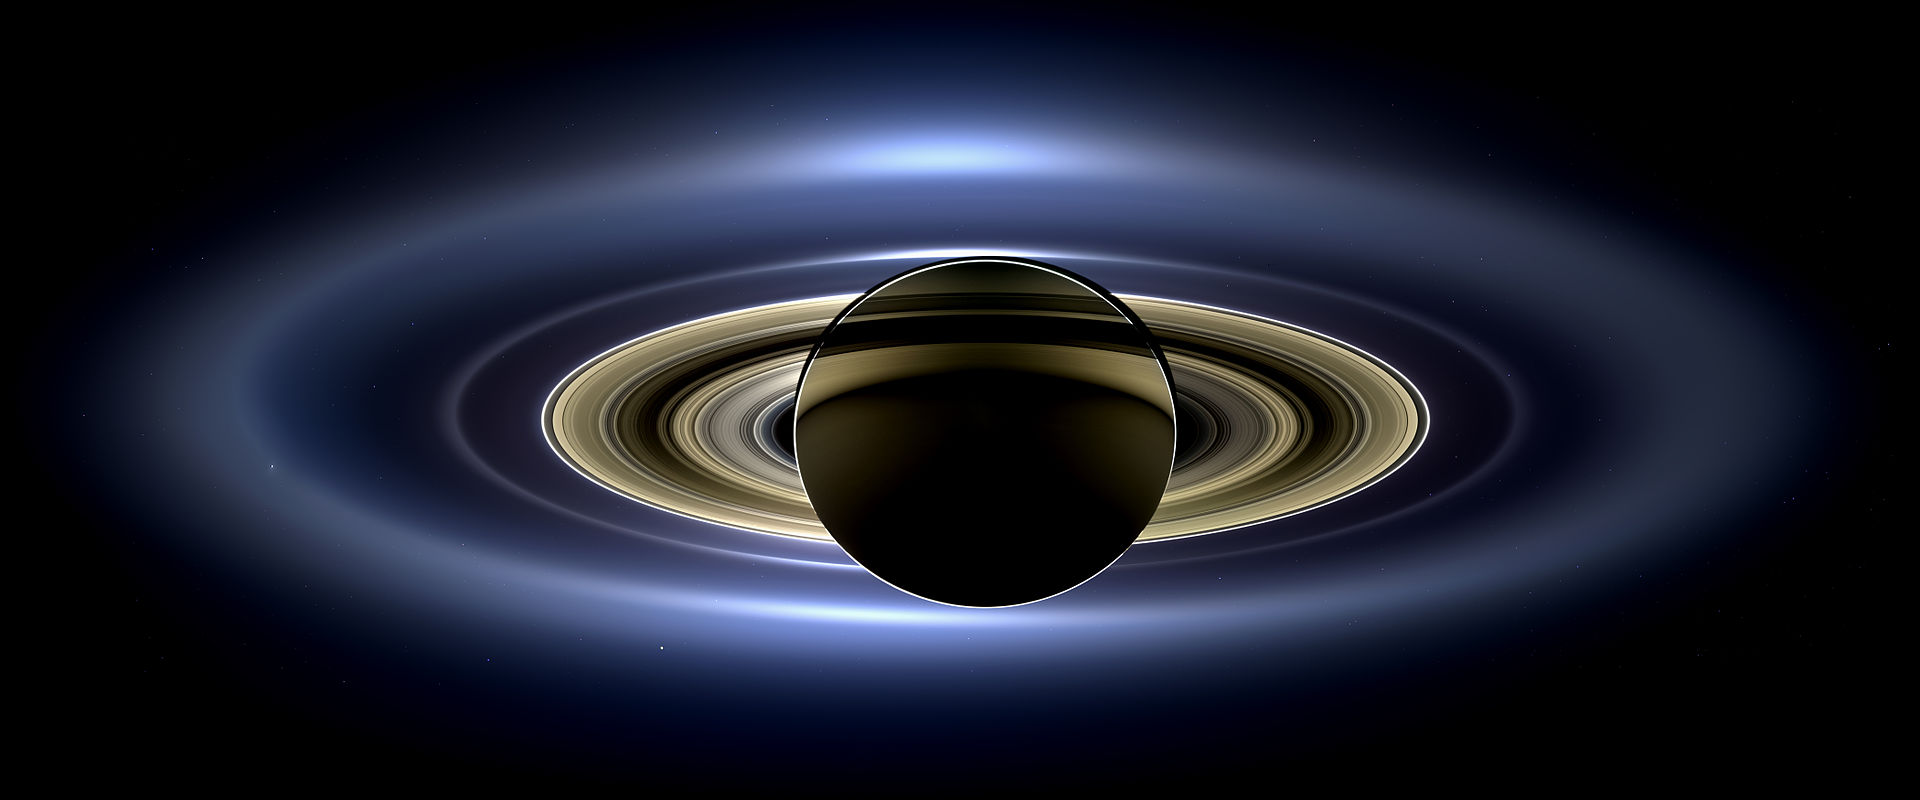 What Are The Moons Of Saturn